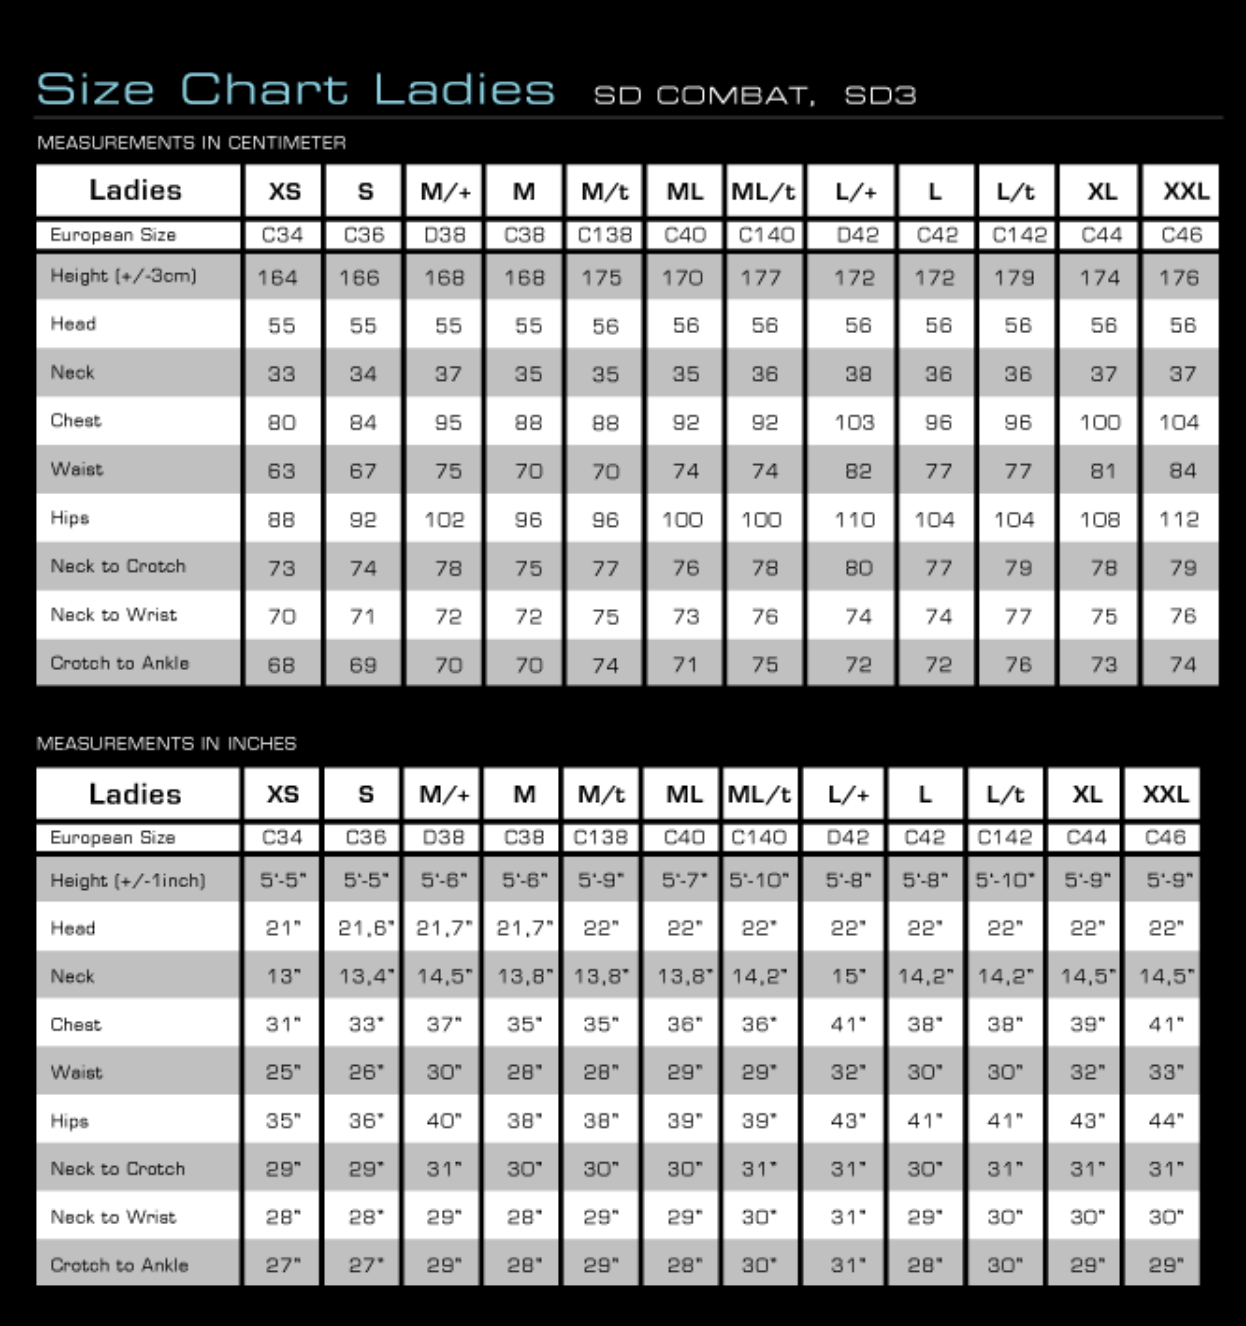 Female Size Chart for SD Combat Semi Dry Wetsuit - Discontinued